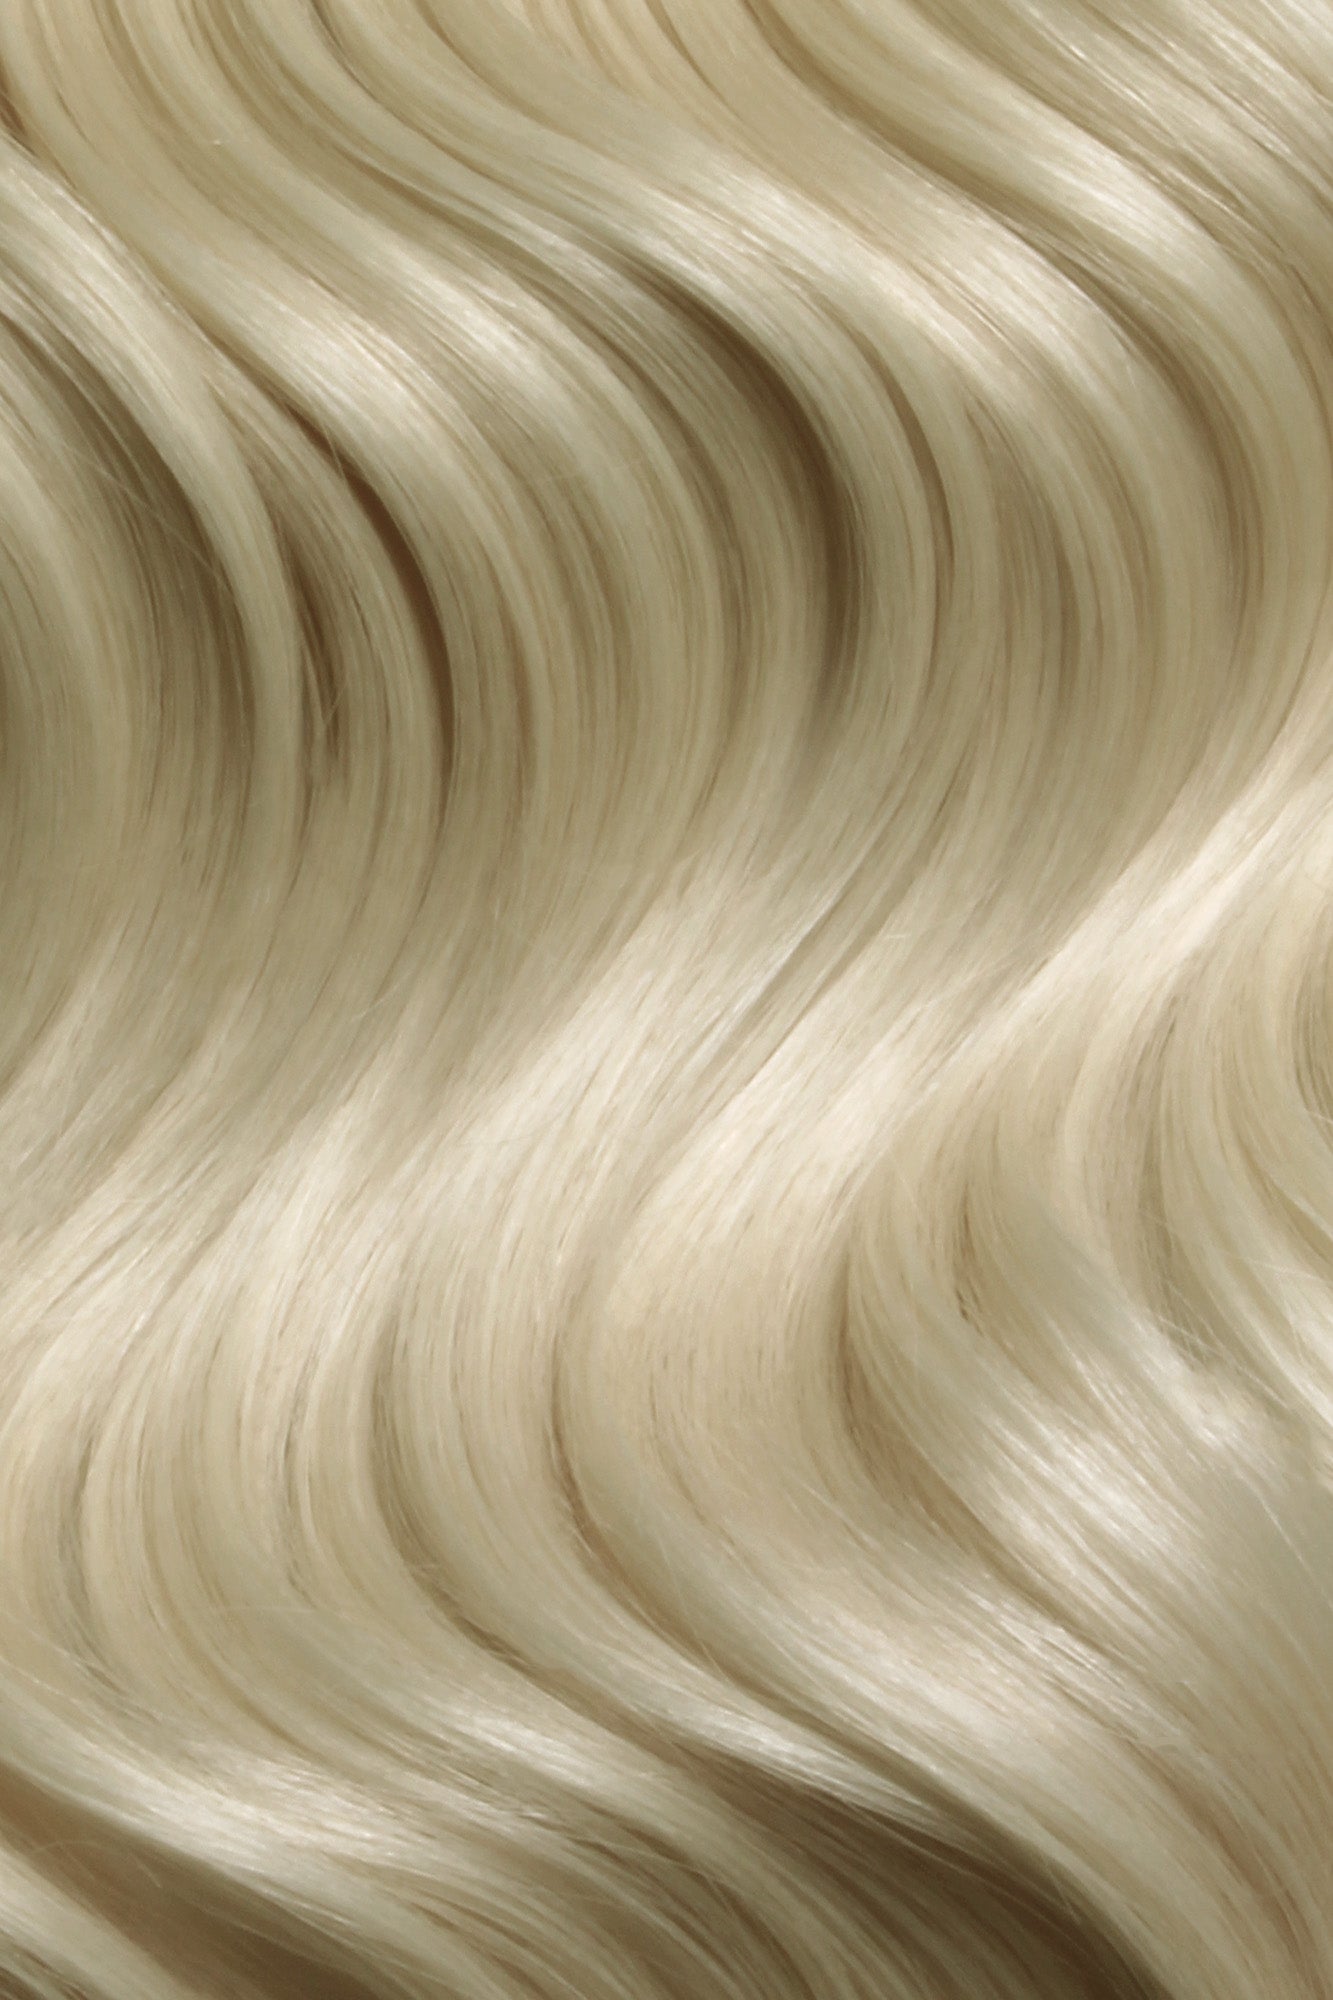 Nano Bonds 22 Inches - SWAY Hair Extensions Sandy-Blonde-60 Ultra-fine, invisible bonds for a flawless, natural look. 100% Remy Human hair, lightweight and versatile. Reusable and perfect for individual or salon use.